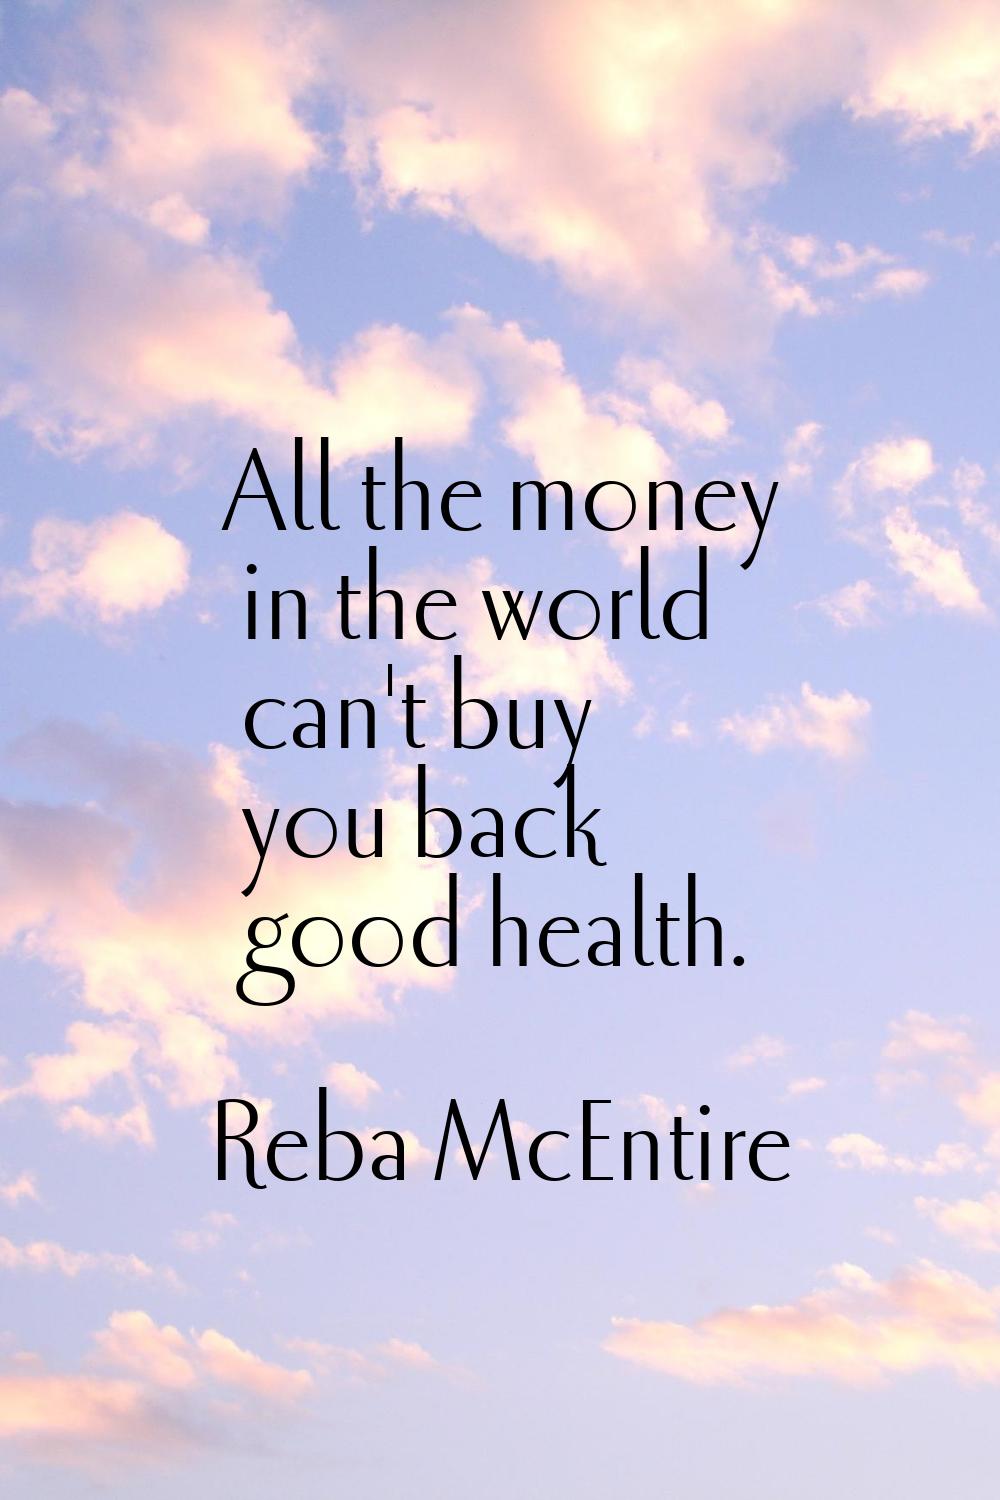 All the money in the world can't buy you back good health.